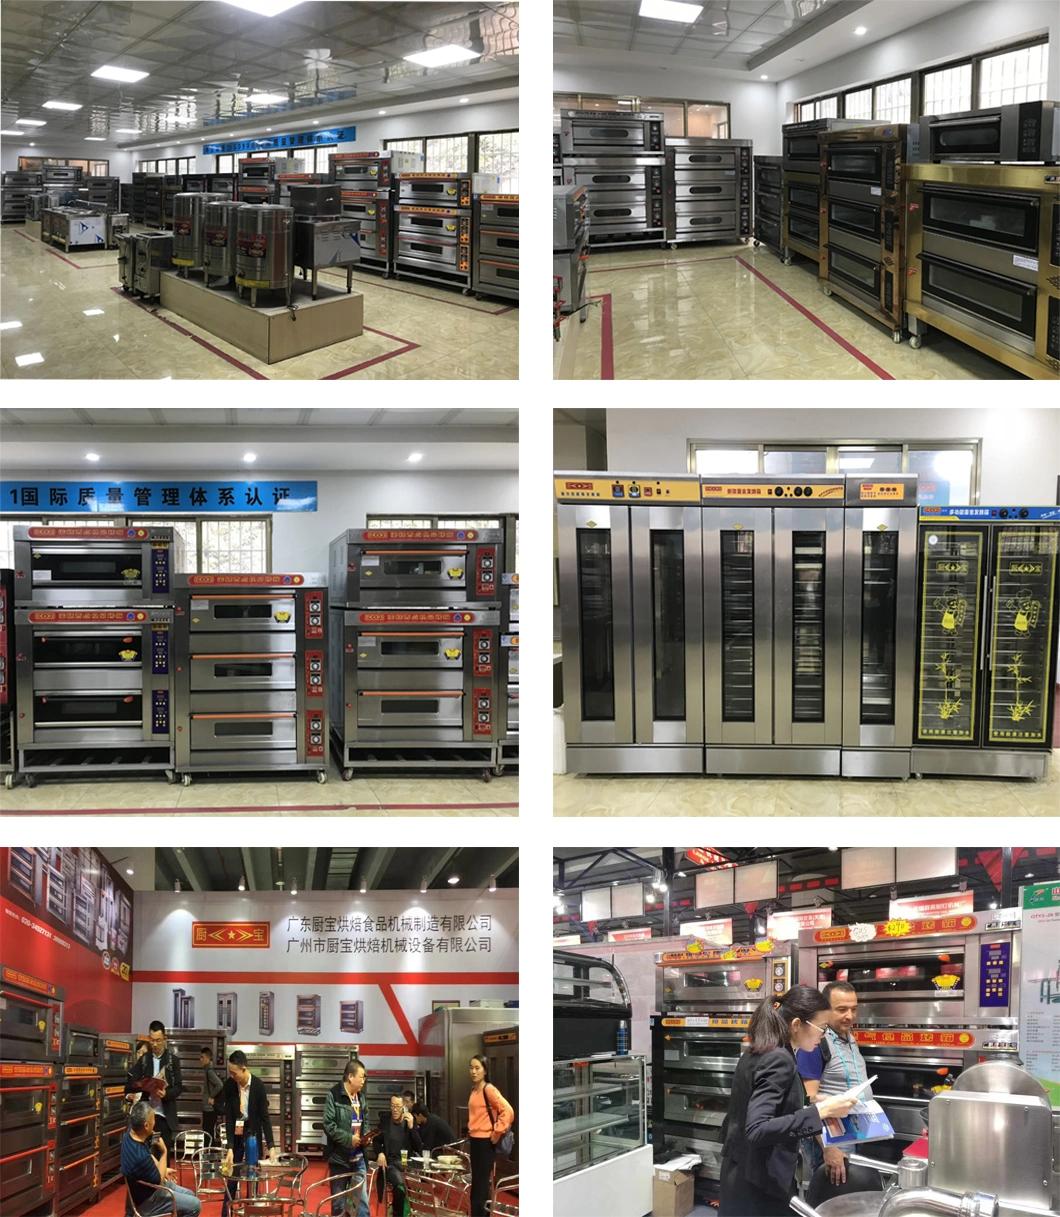 Commercial Kitchen 1 Deck 2 Tray Gas Oven for Restaurant Baking Equipment Bakery Machine Food Equipment Oven